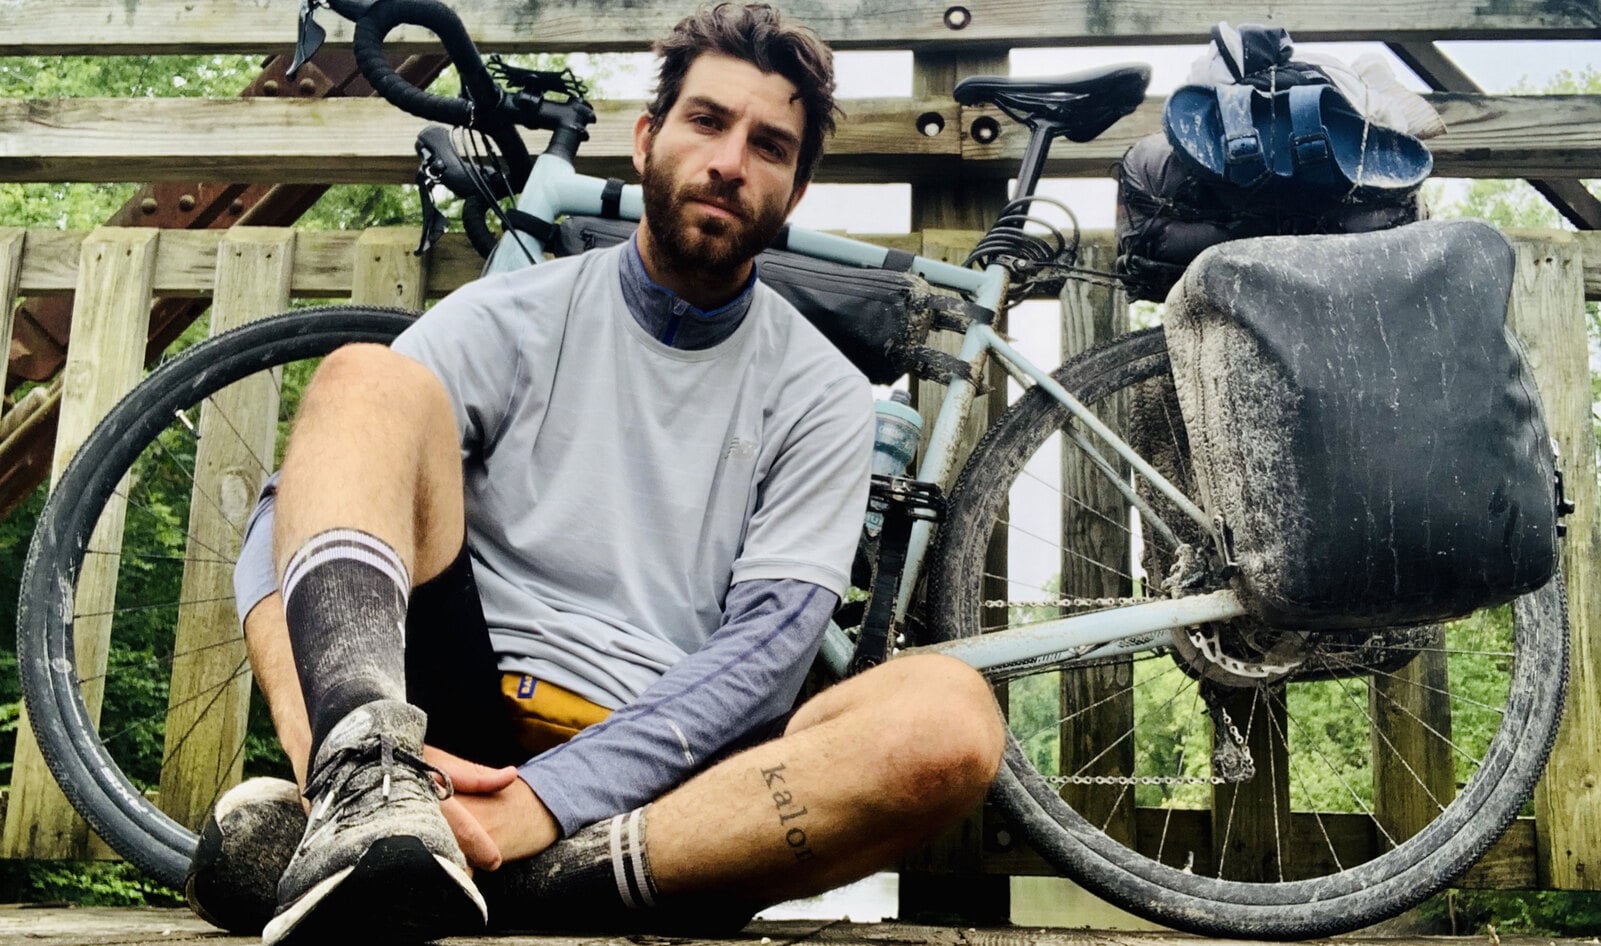 Vegan Cyclist Donates 1,600 Vegan Meals to the Hungry as Part of an 85-Day Cycling Tour